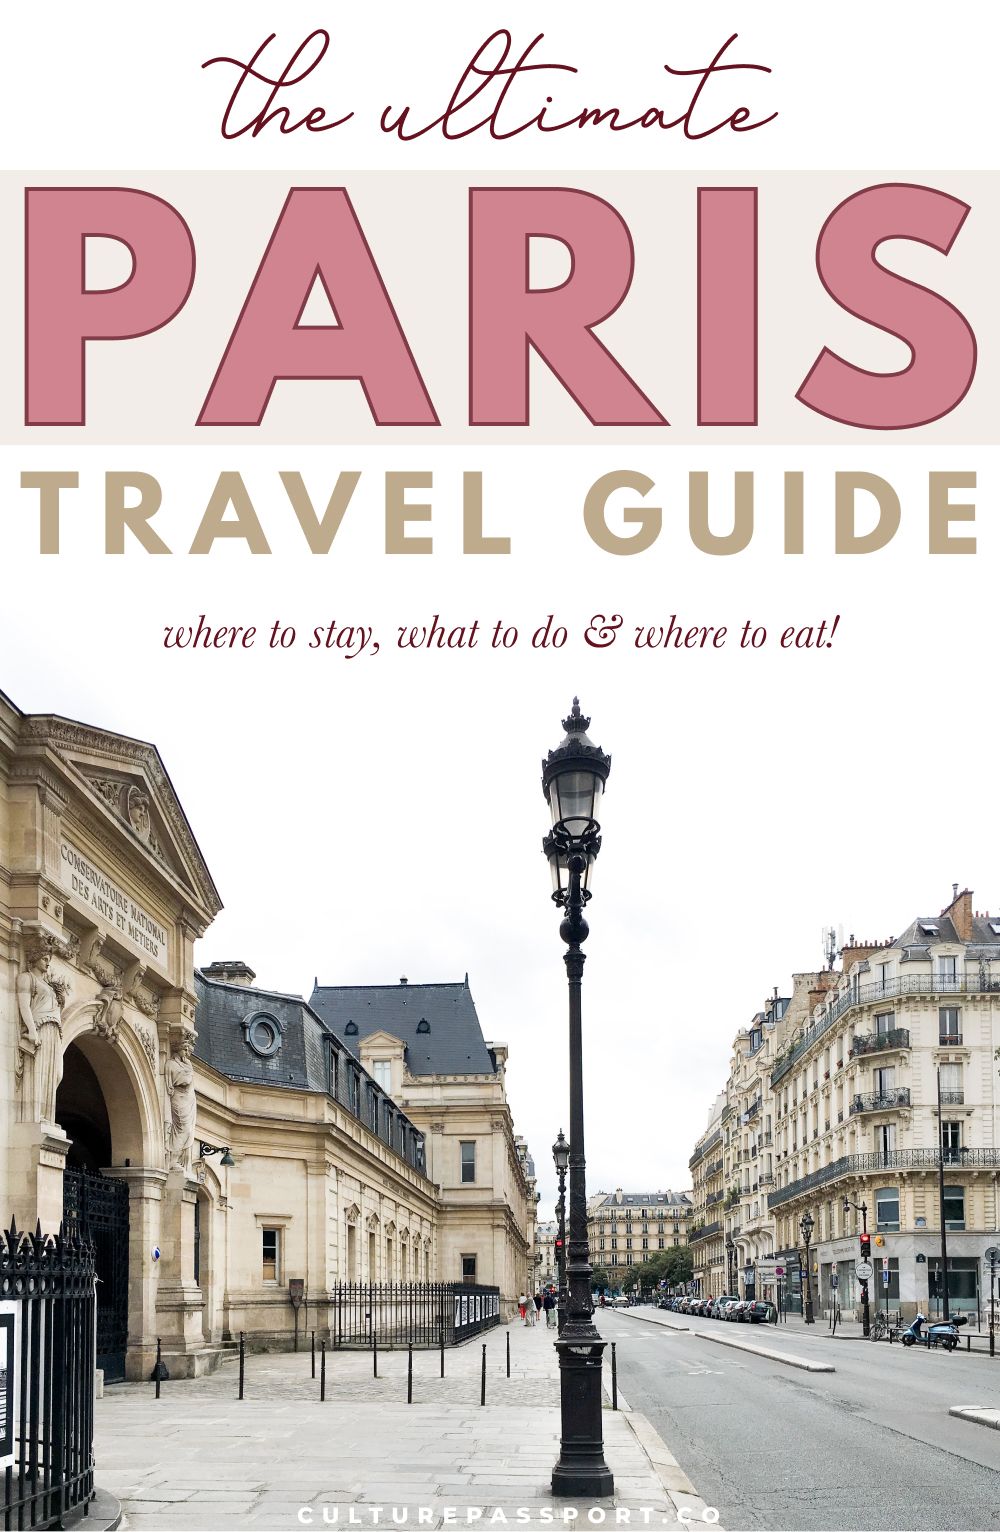 Paris Travel Guide: Where To Stay, What To Do And Where To Eat in Paris, France